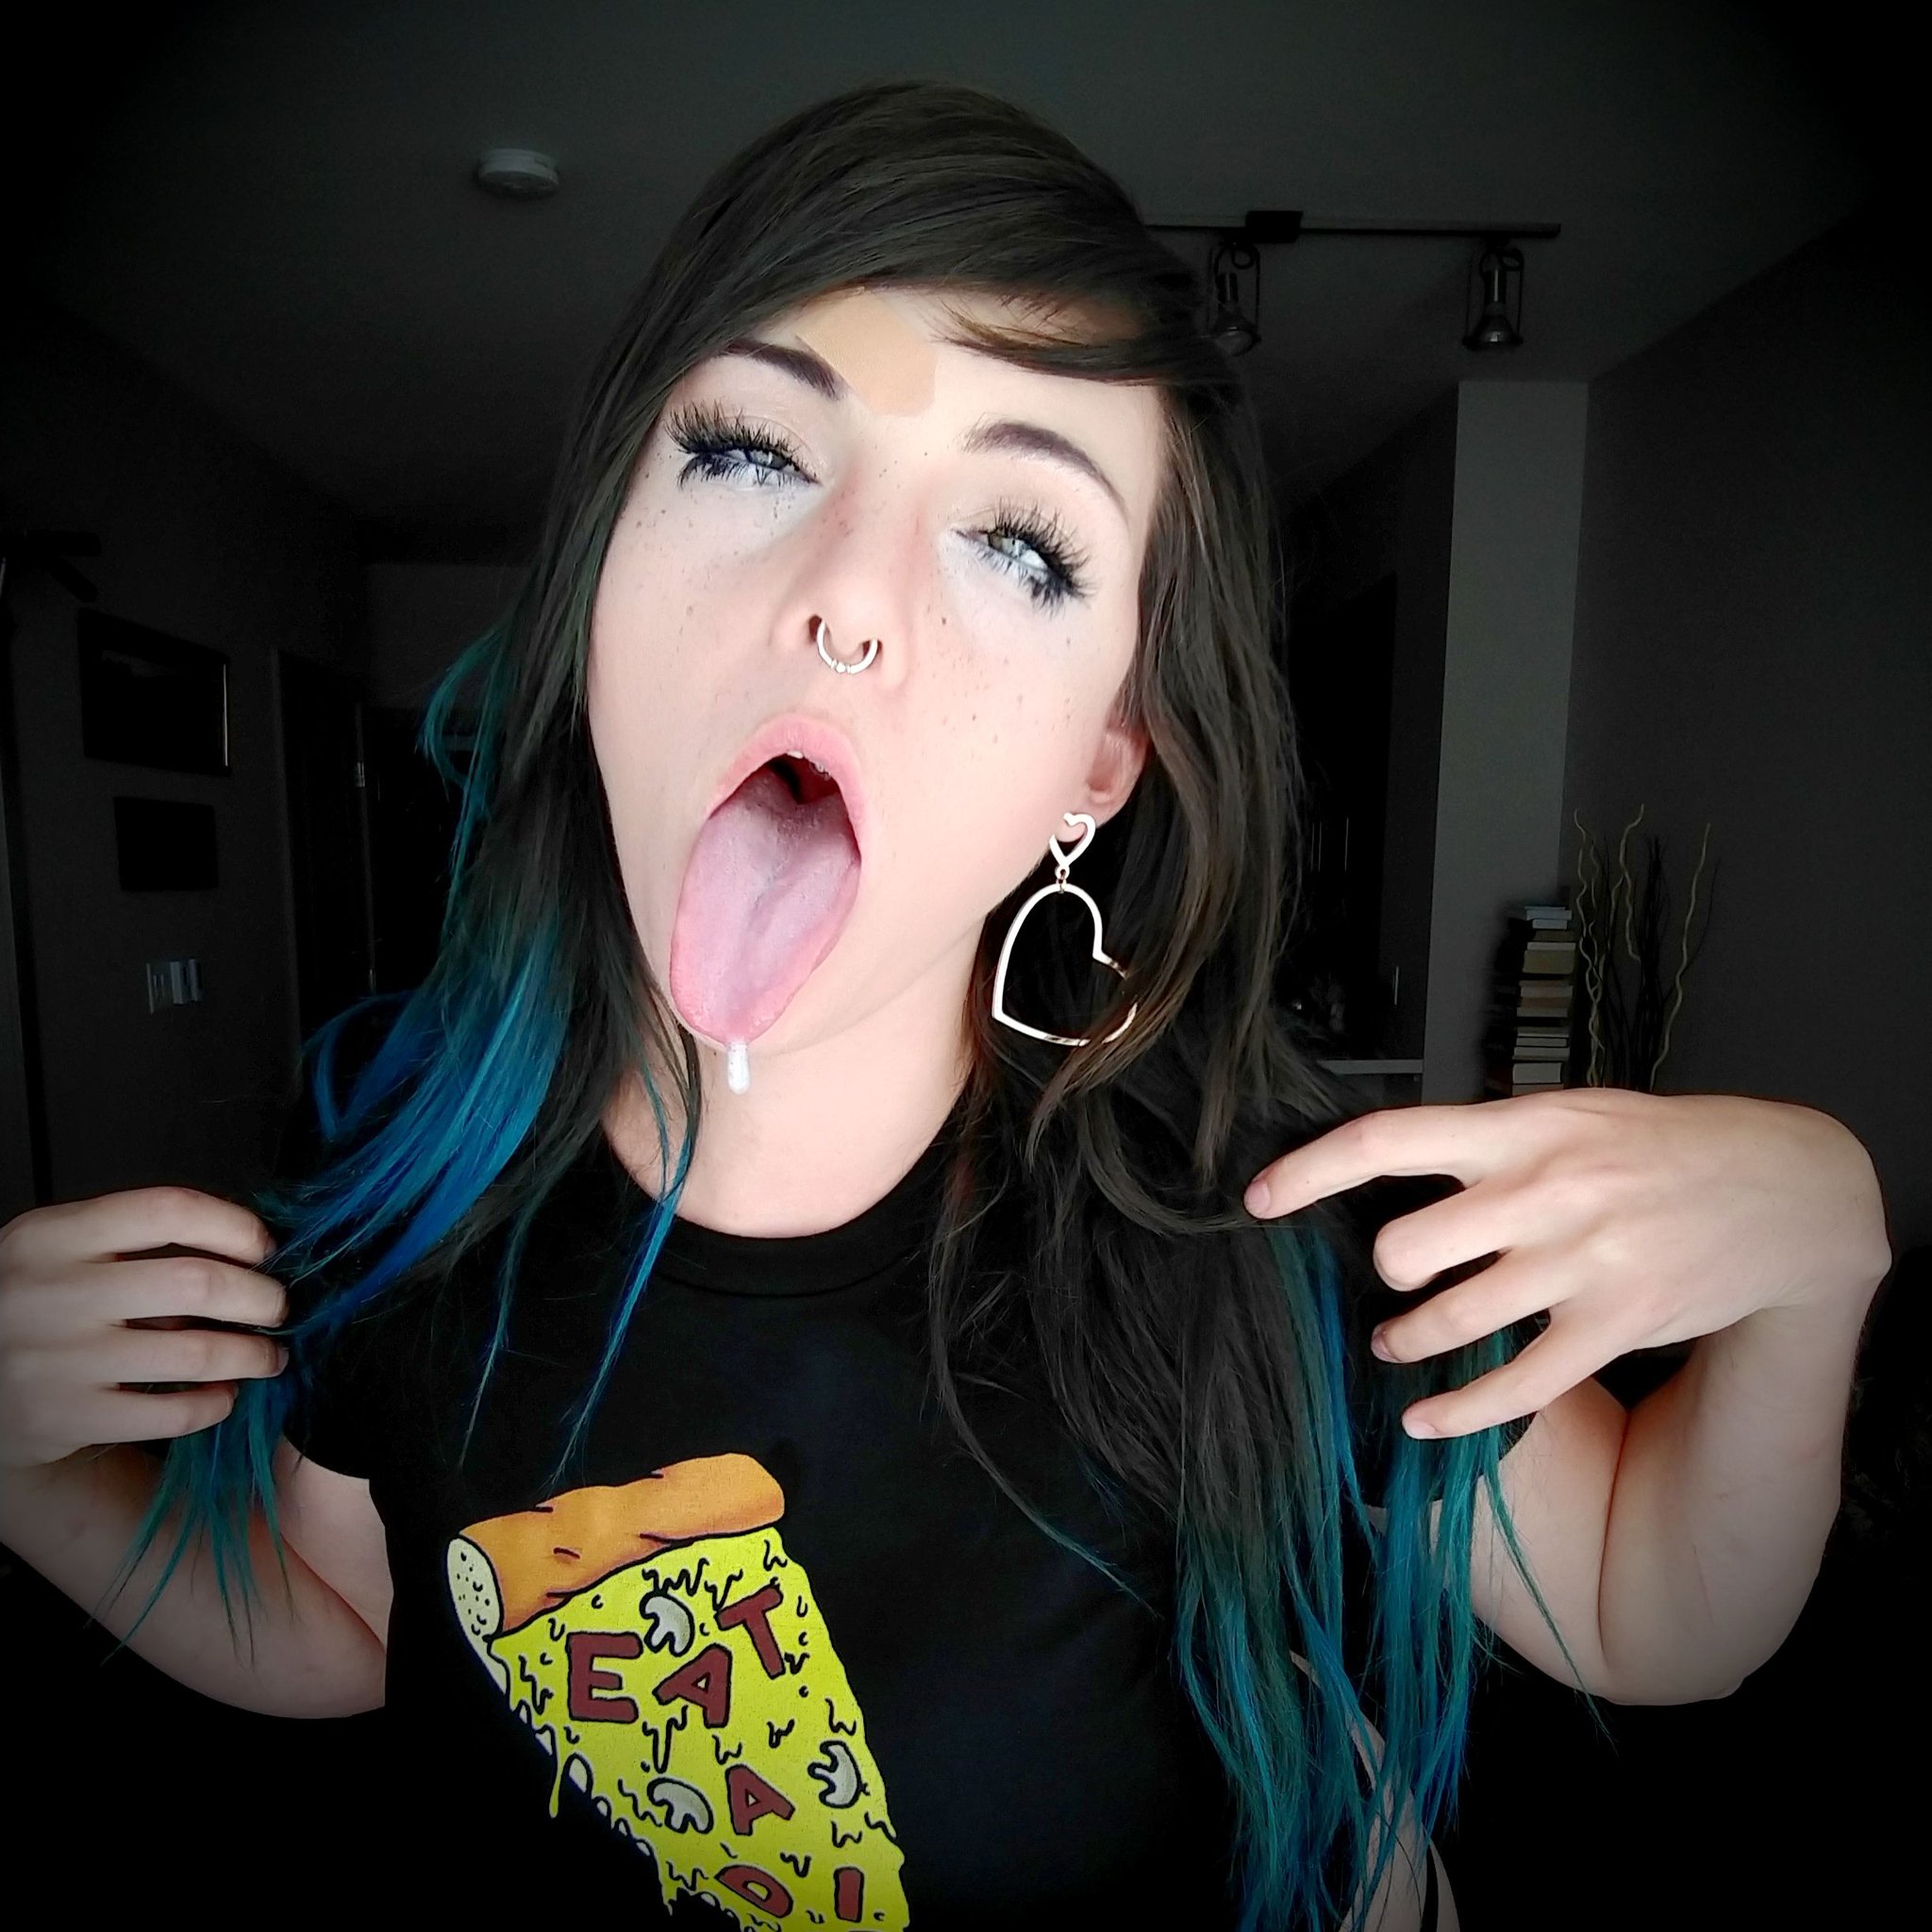 Nerdy Dirty Cosplay (Kat) på Twitter: "One of my favs :3 #ahegao #lewd...